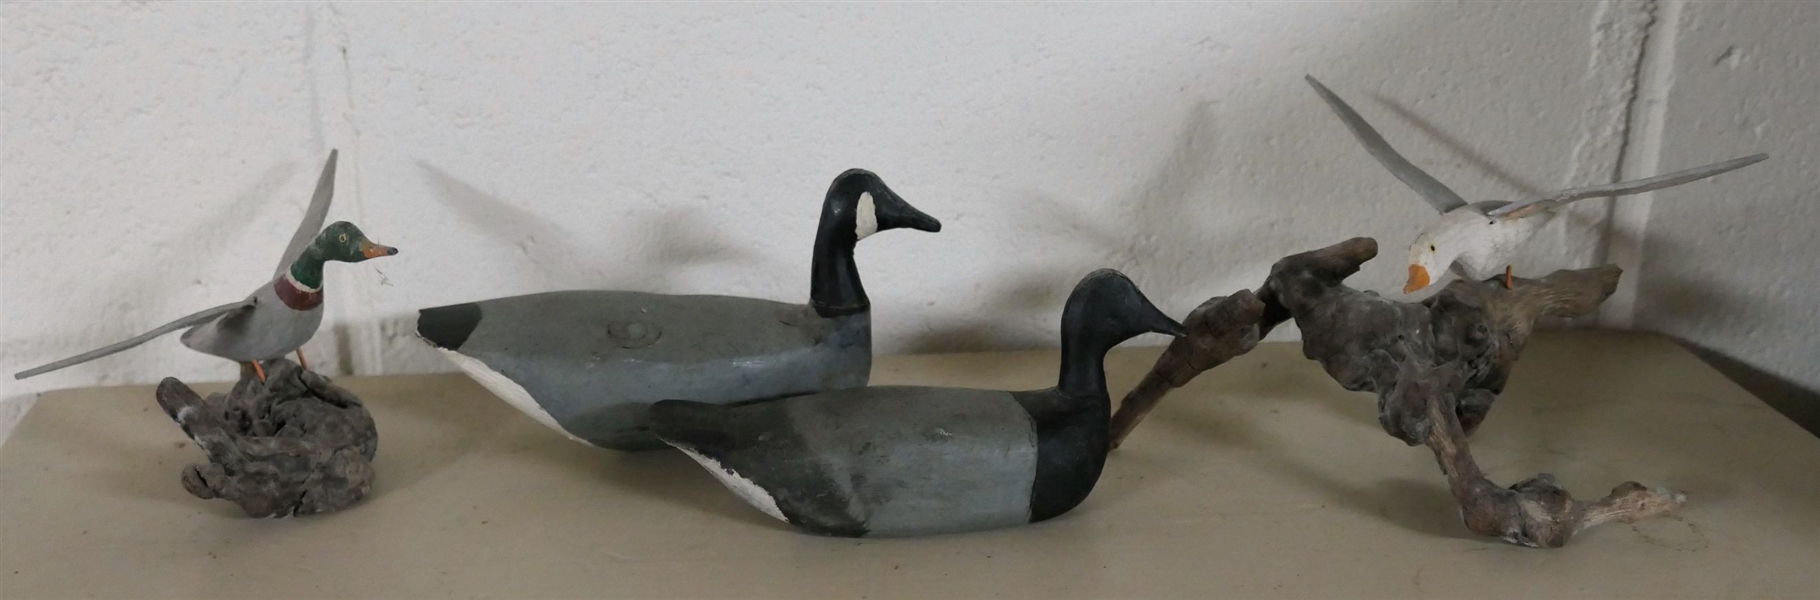 4 Hand Carved Wood Ducks and Sea Gull  - Gray and Black Ducks Measure 3" tall 5" Long - Sea Gull on Drift Wood Measures 4" tall 5" Across